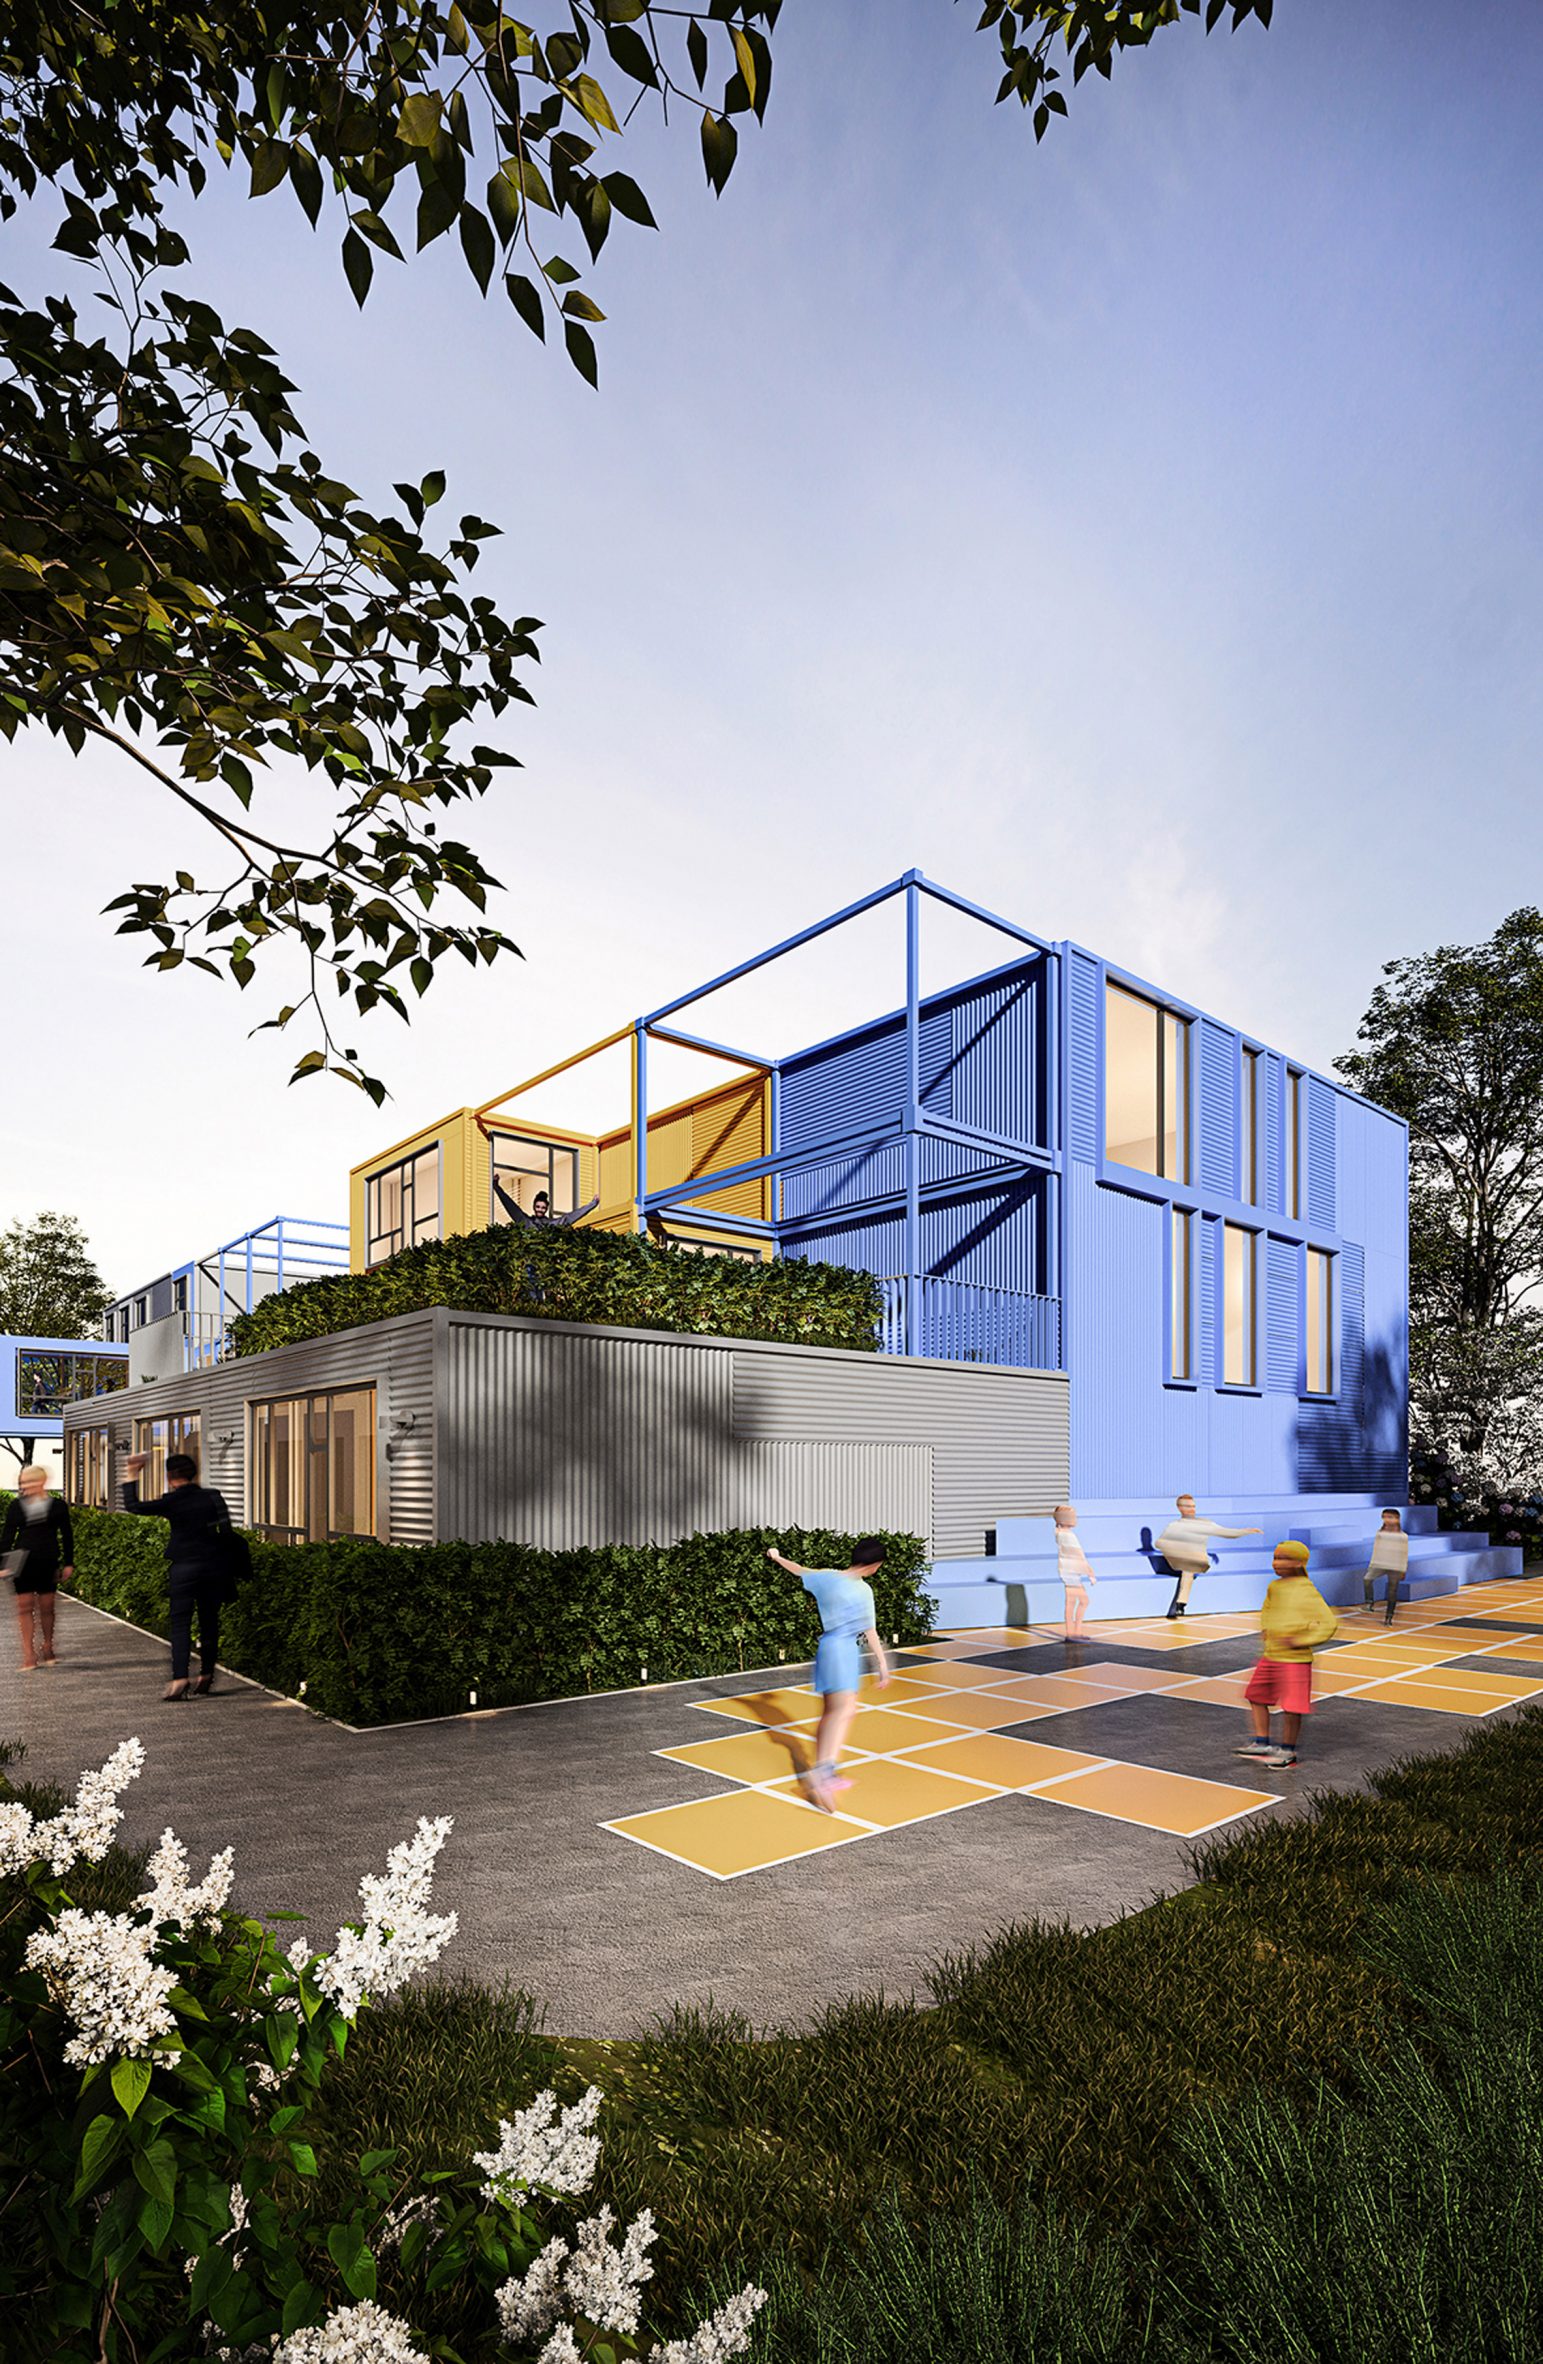 Render of the exterior of the school concept with children playing